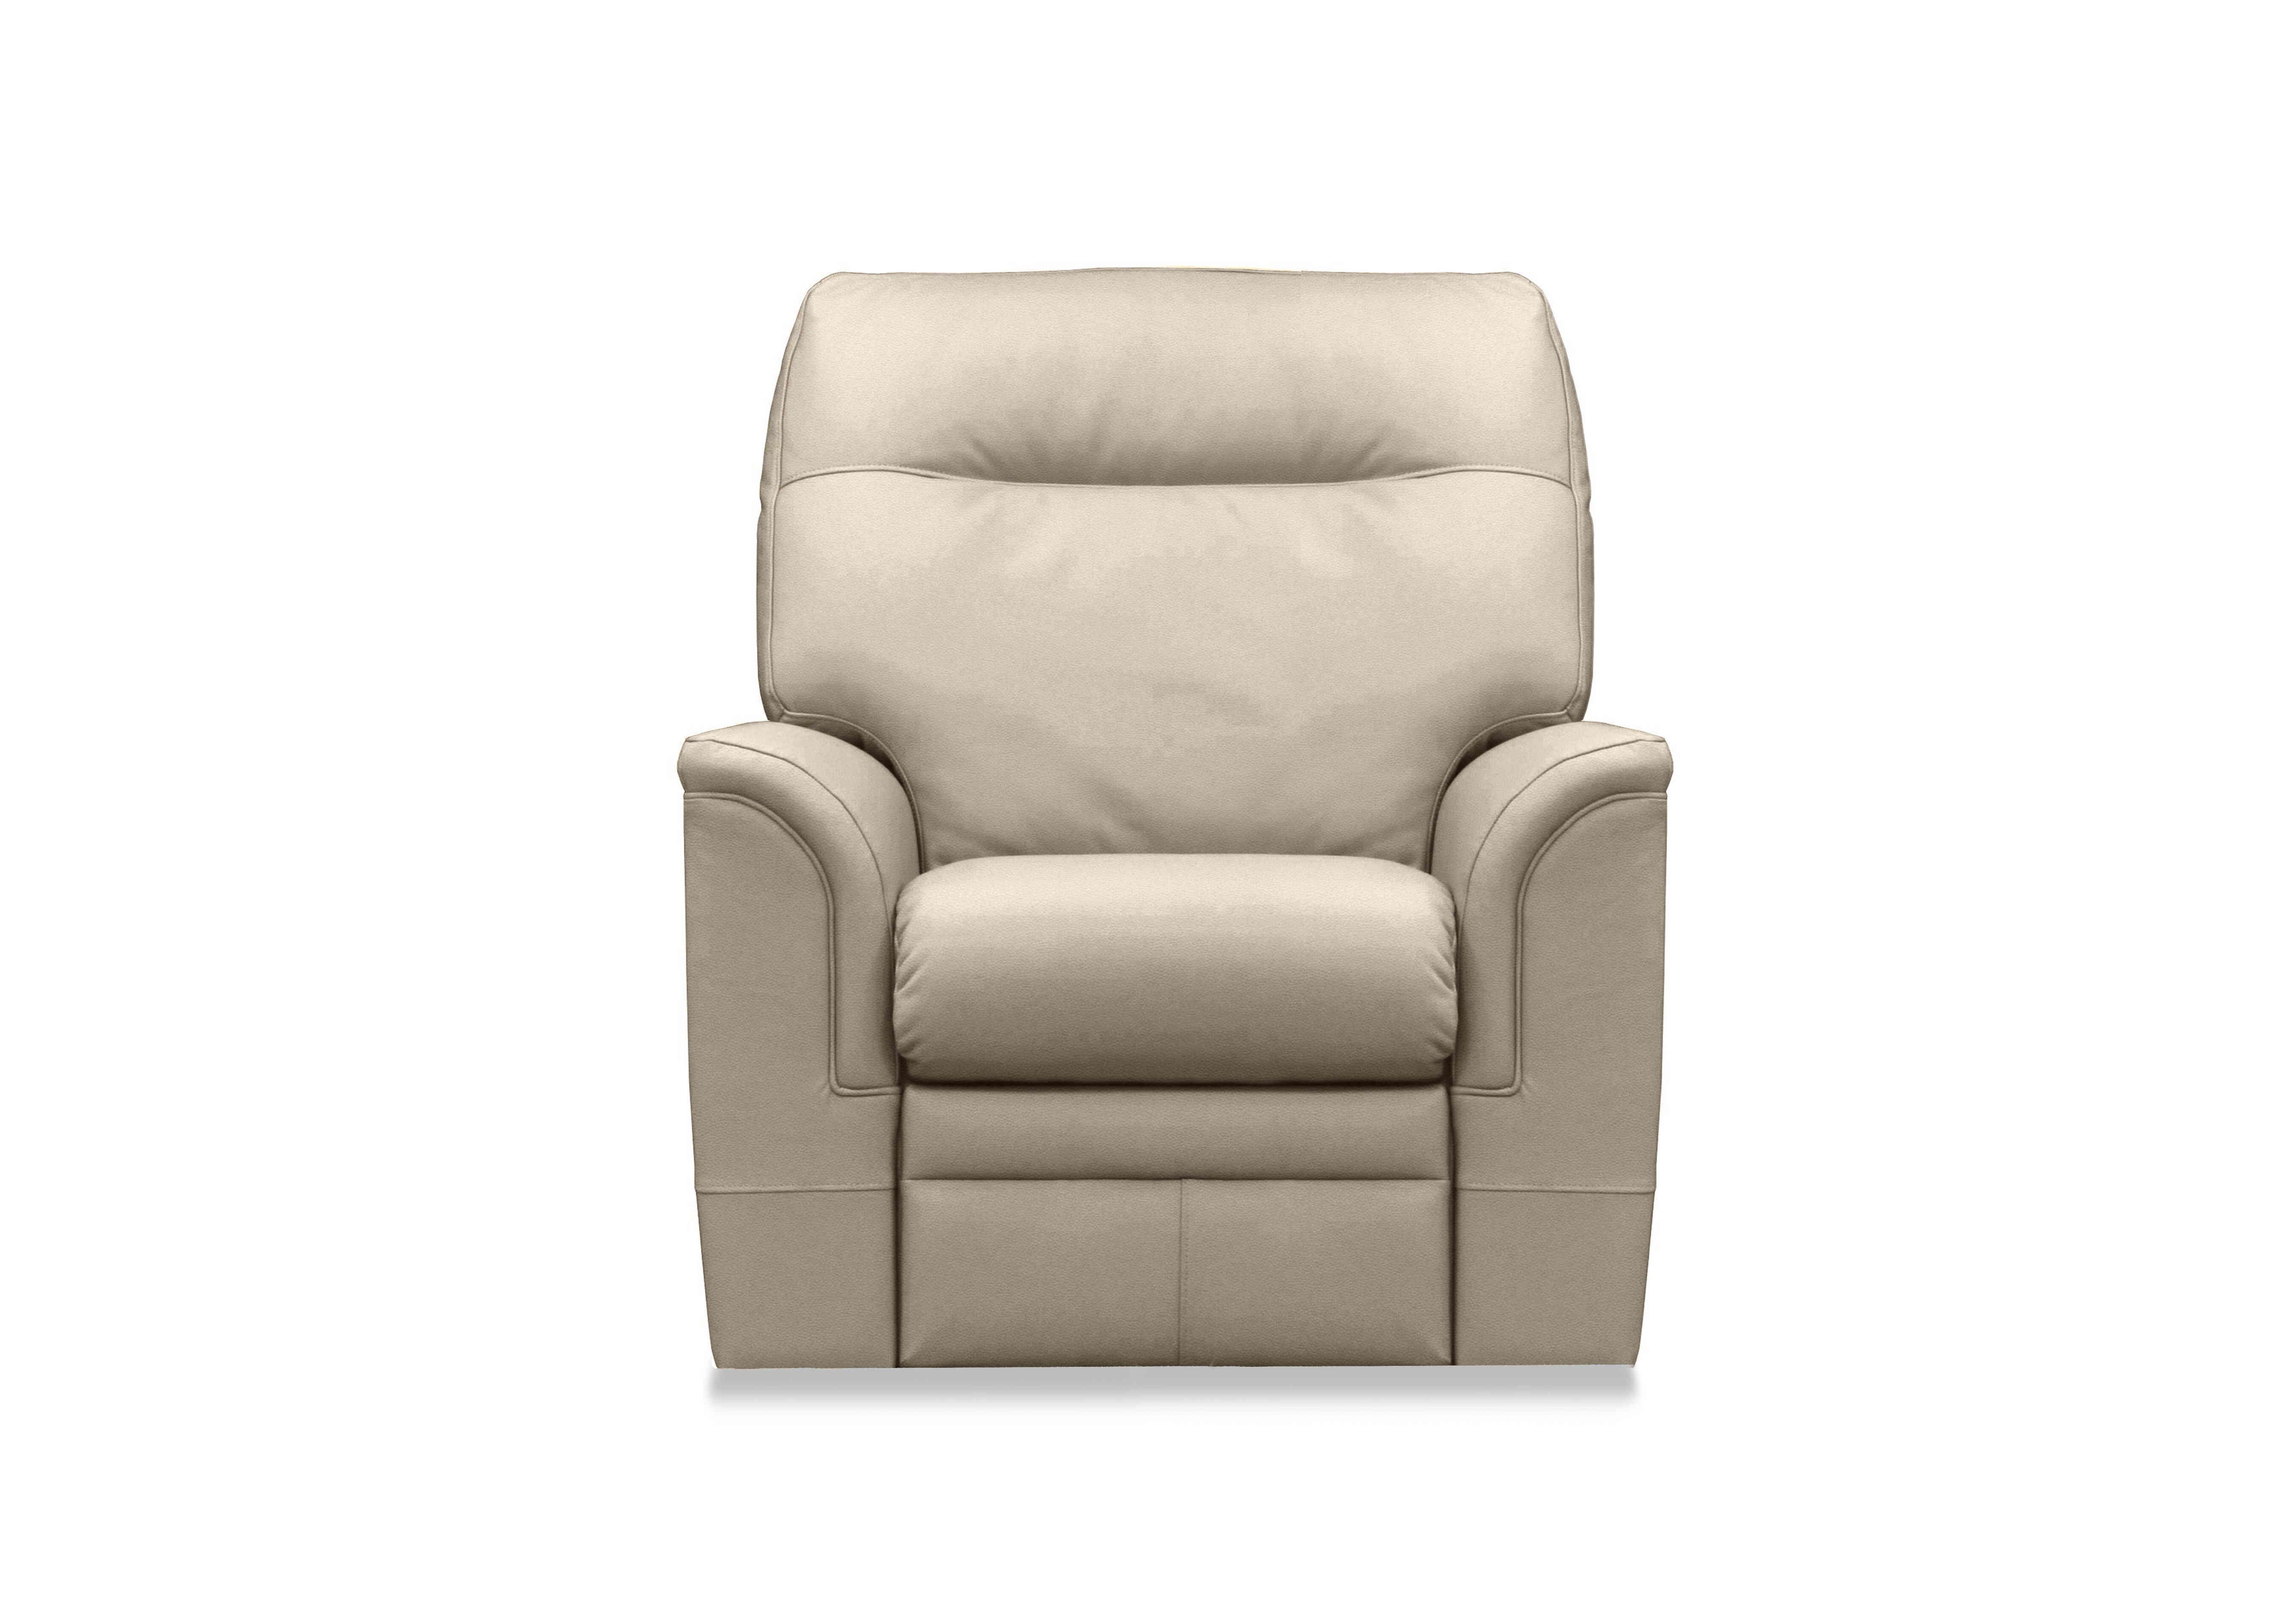 Hudson 23 Leather Power Recliner Chair with Power Headrest and Power Lumbar in Como Taupe 0053051-0019 on Furniture Village